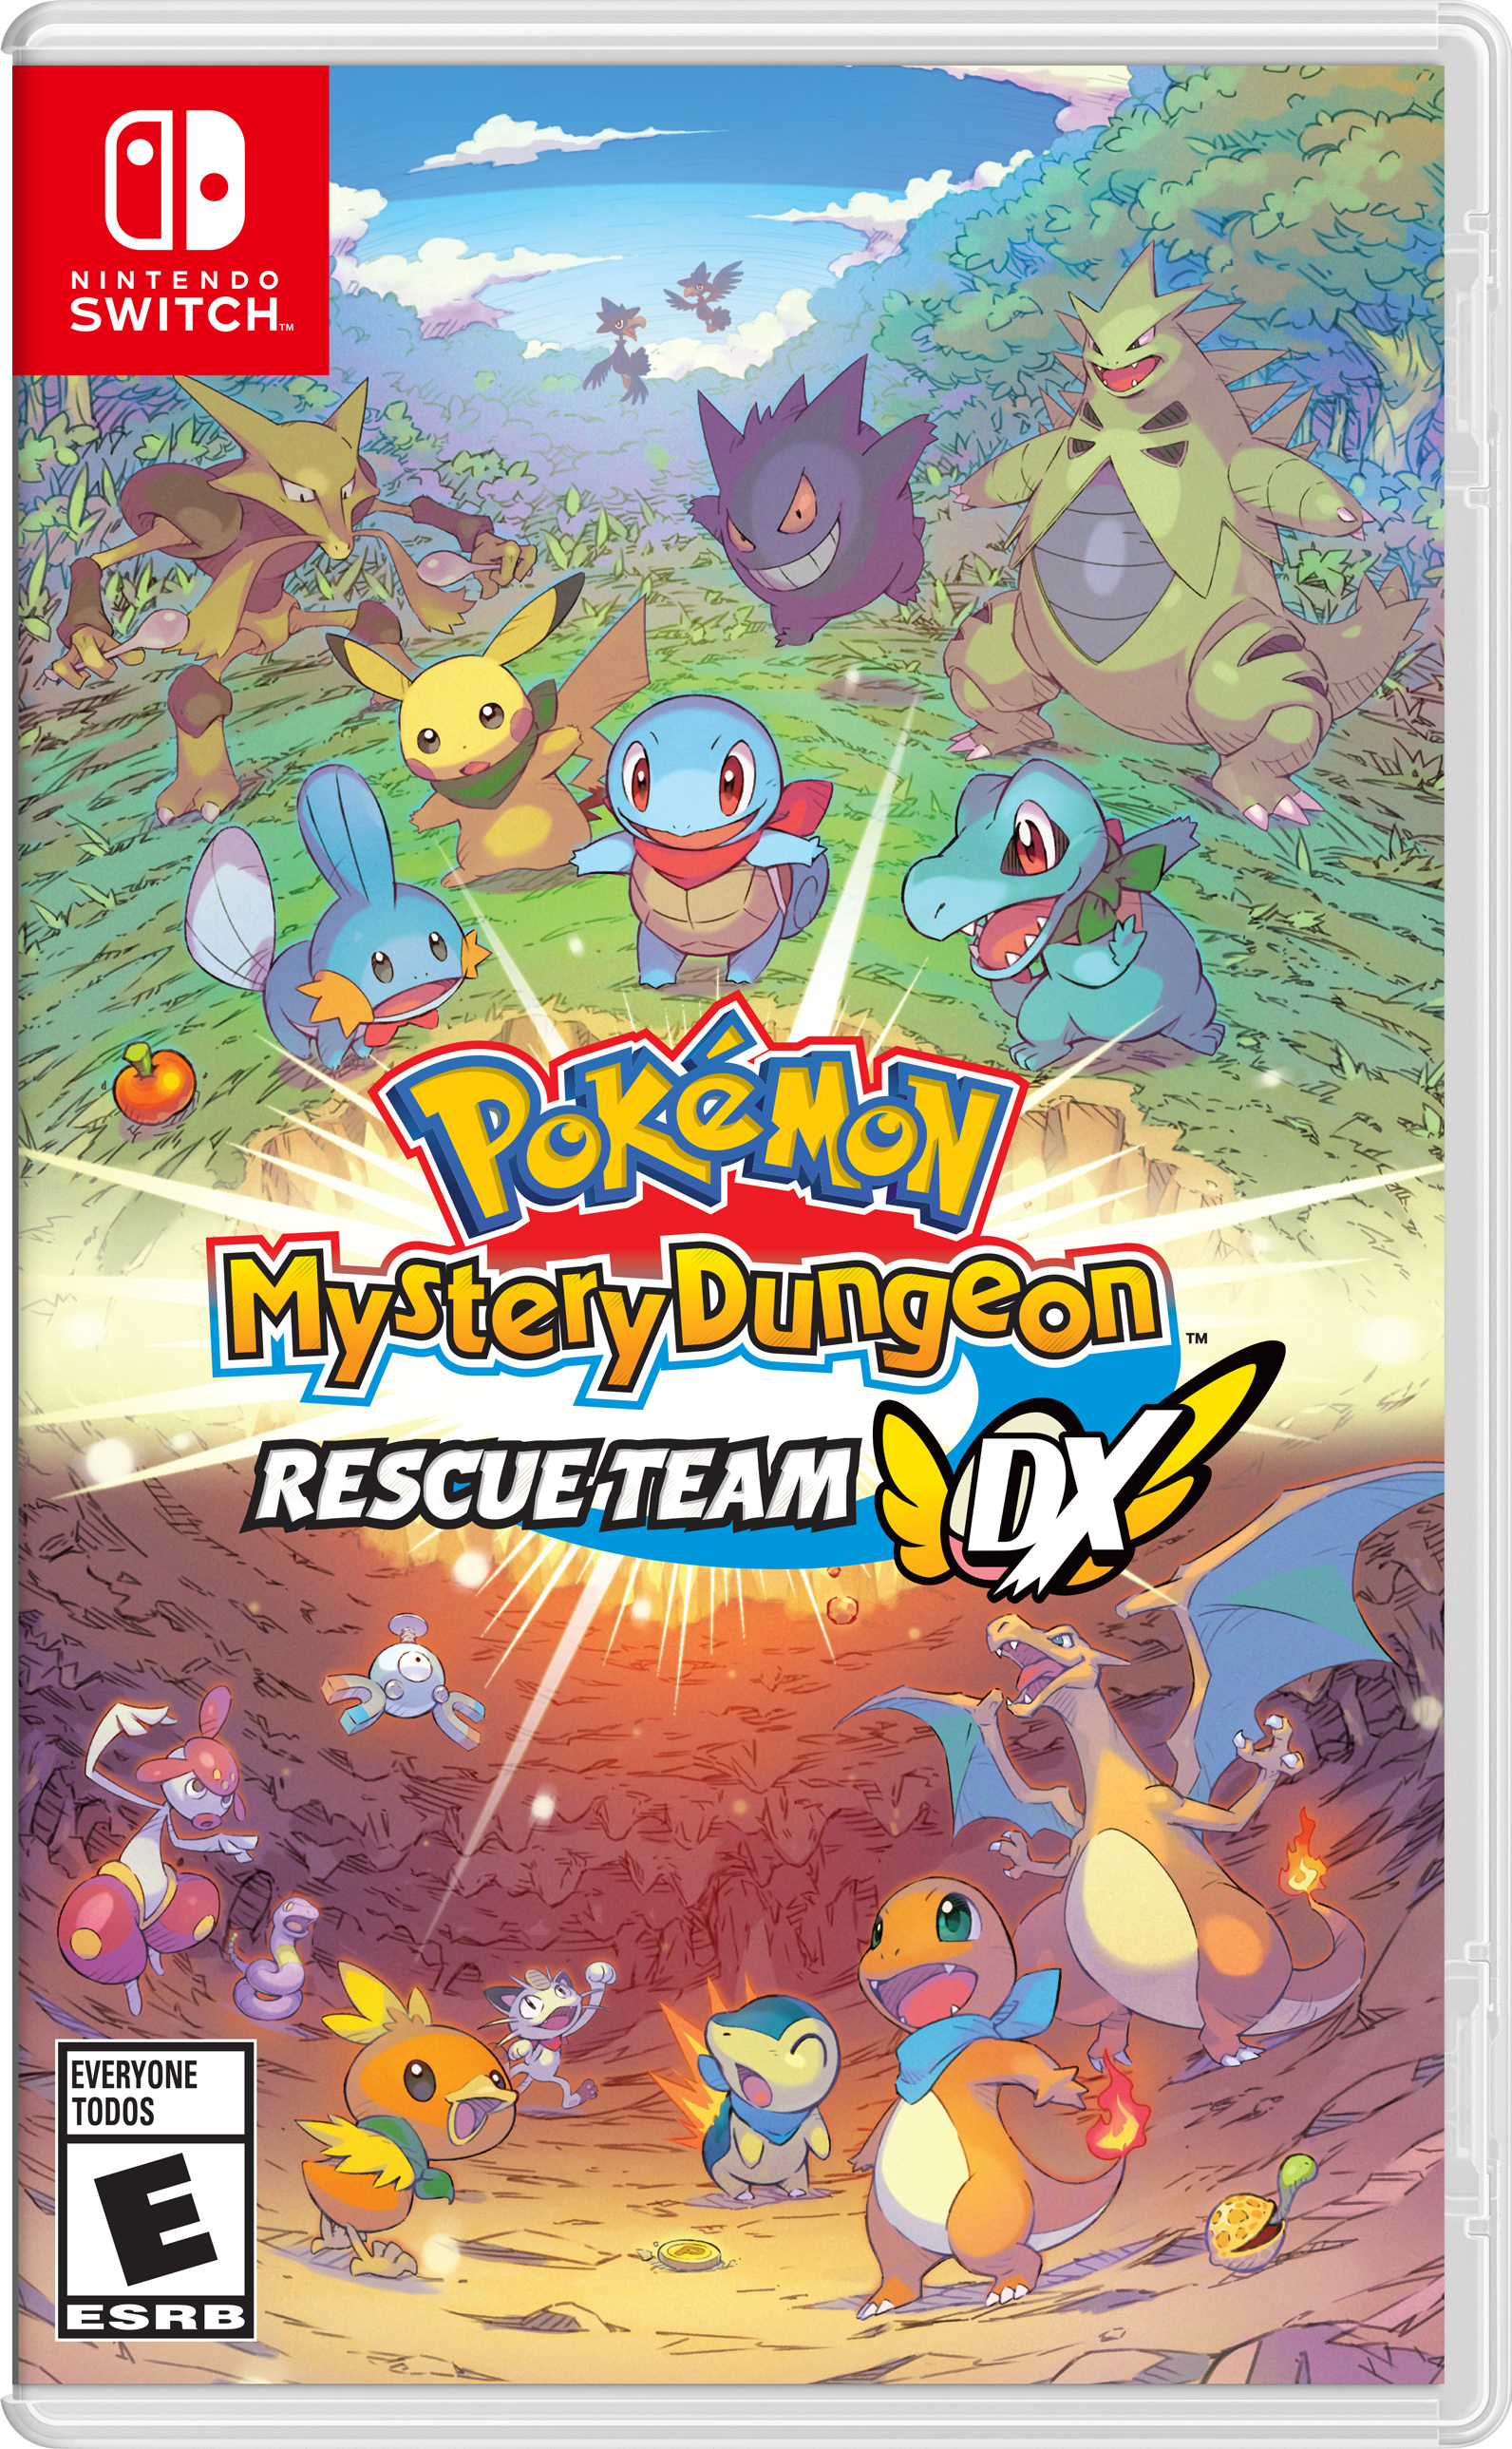 Pokemon Mystery Dungeon Rescue Team Dx Is Now Available On Nintendo Switch Parliamo Di Videogiochi - is roblox coming to nintendo switch current platforms next gen content and more